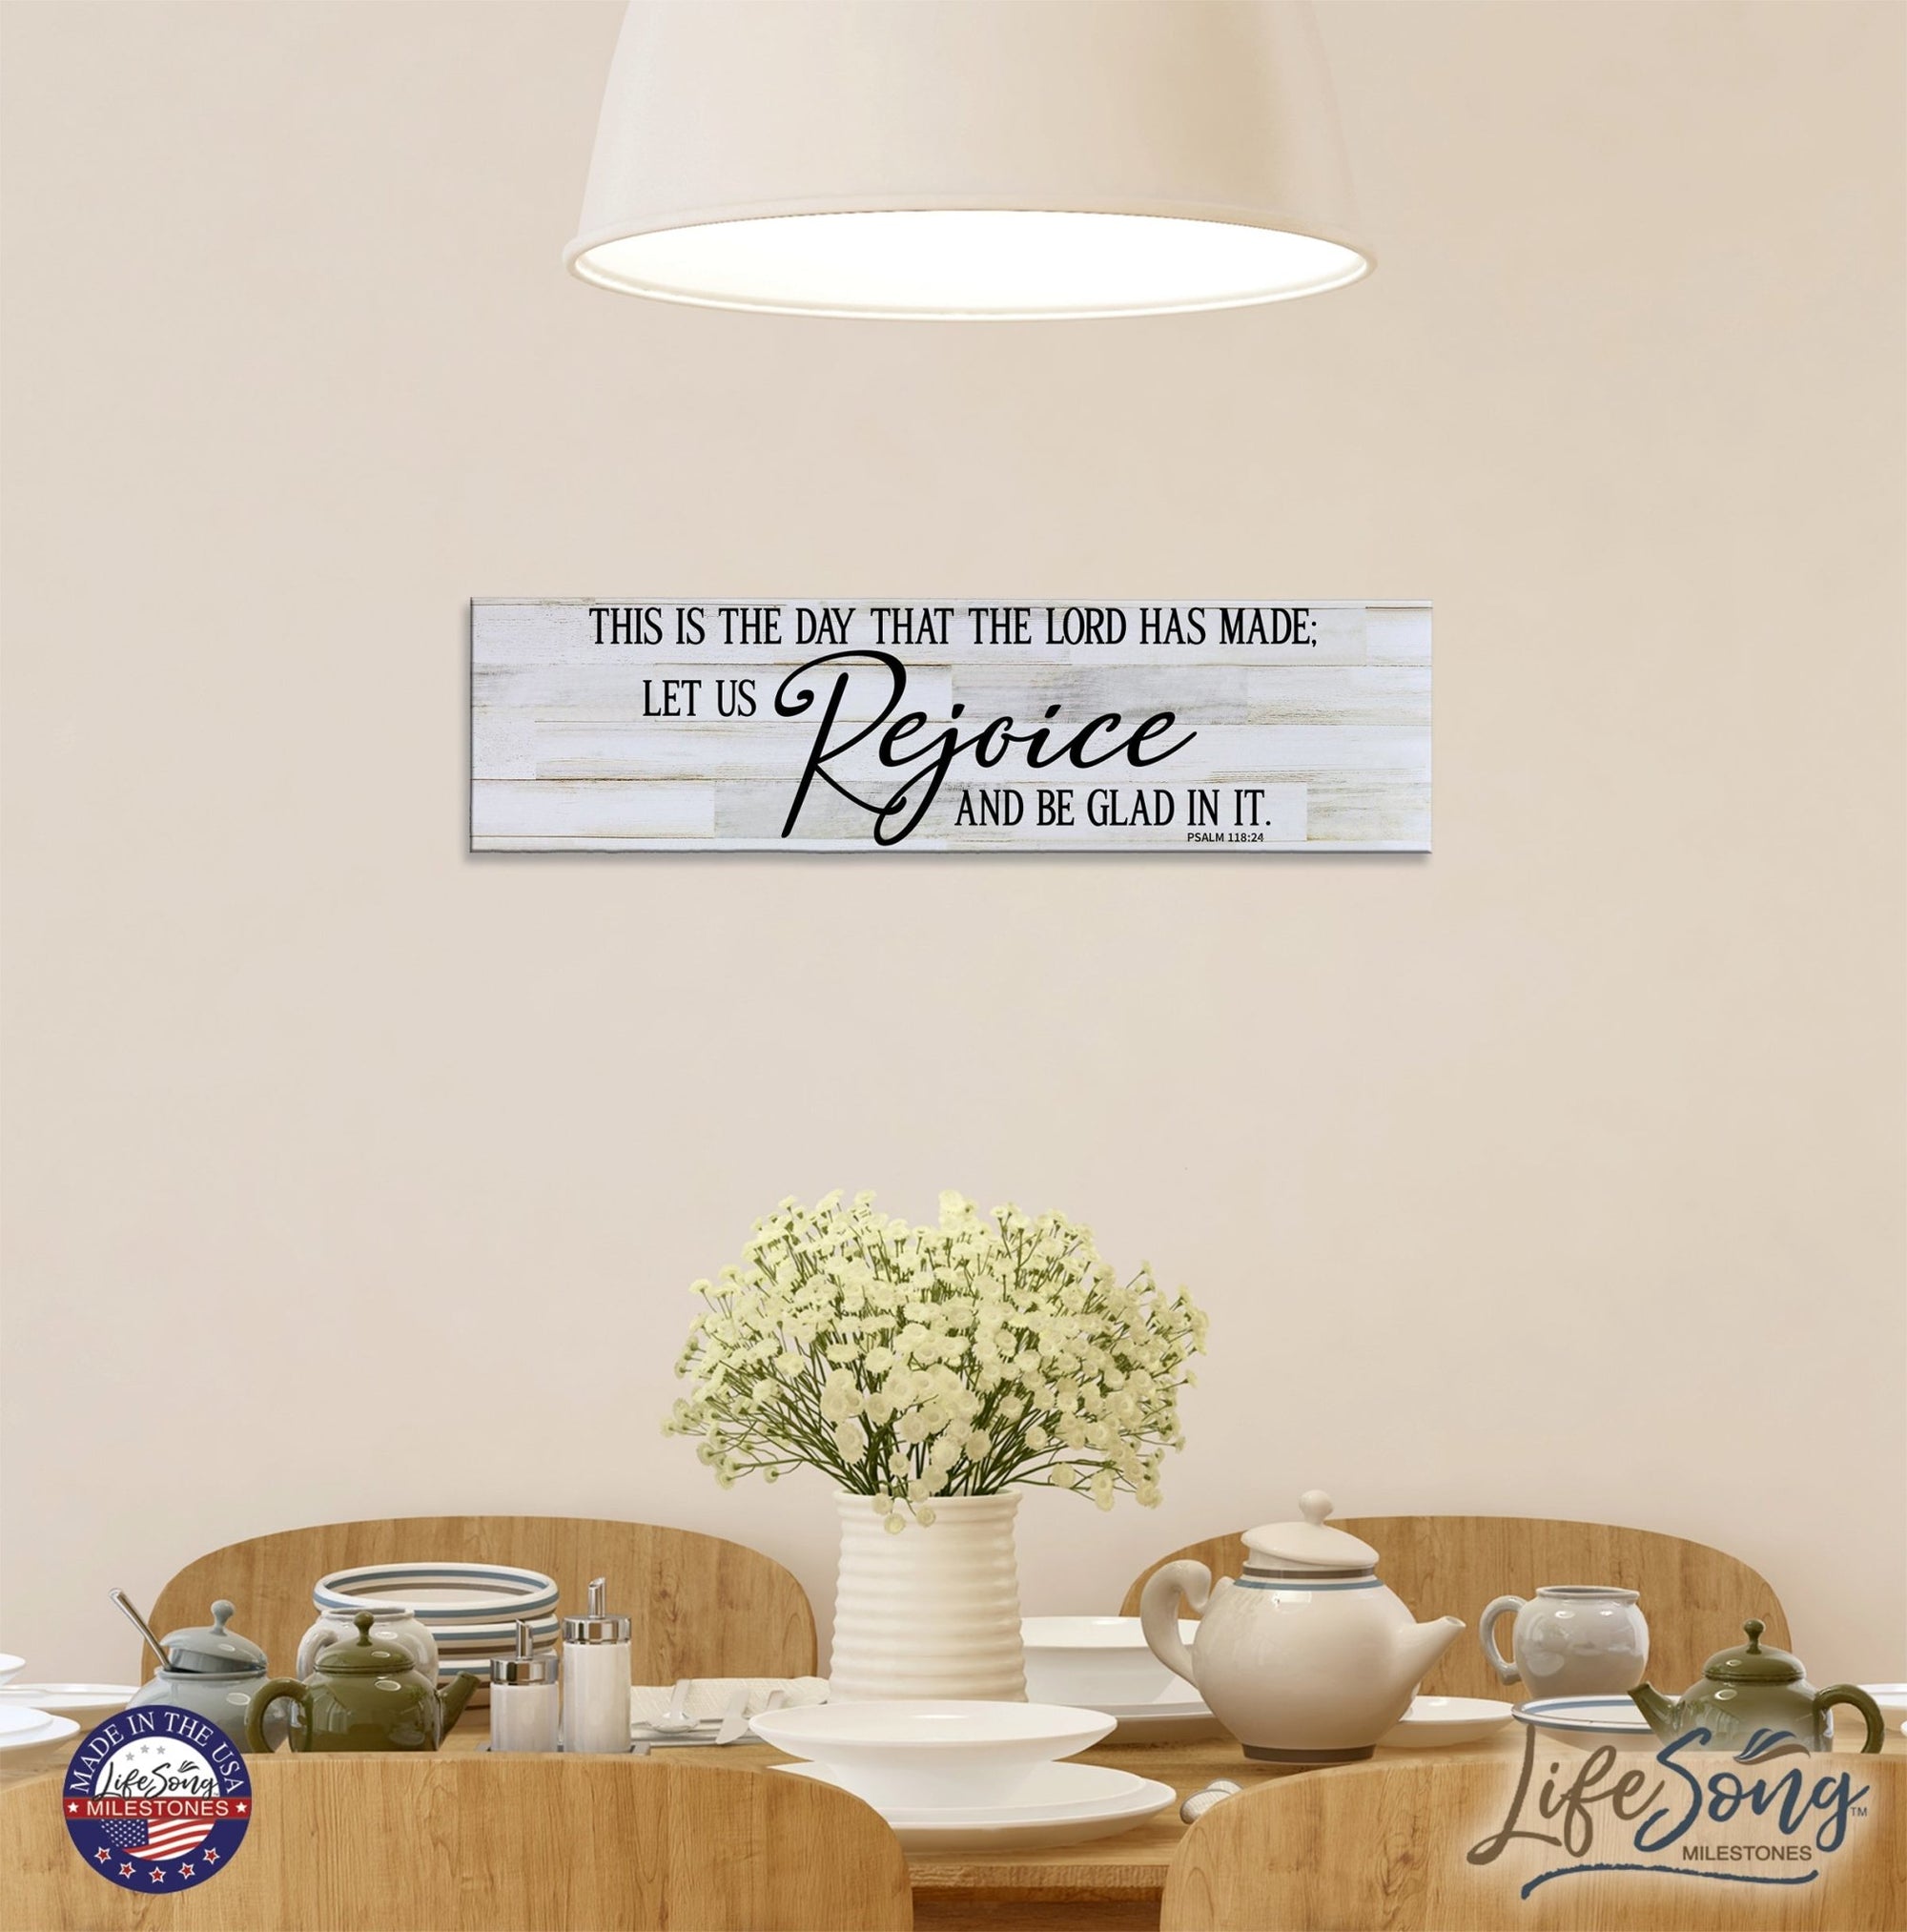 Inspirational Modern Wooden Wall Hanging Plaque 10x40 - This Is The Day - LifeSong Milestones